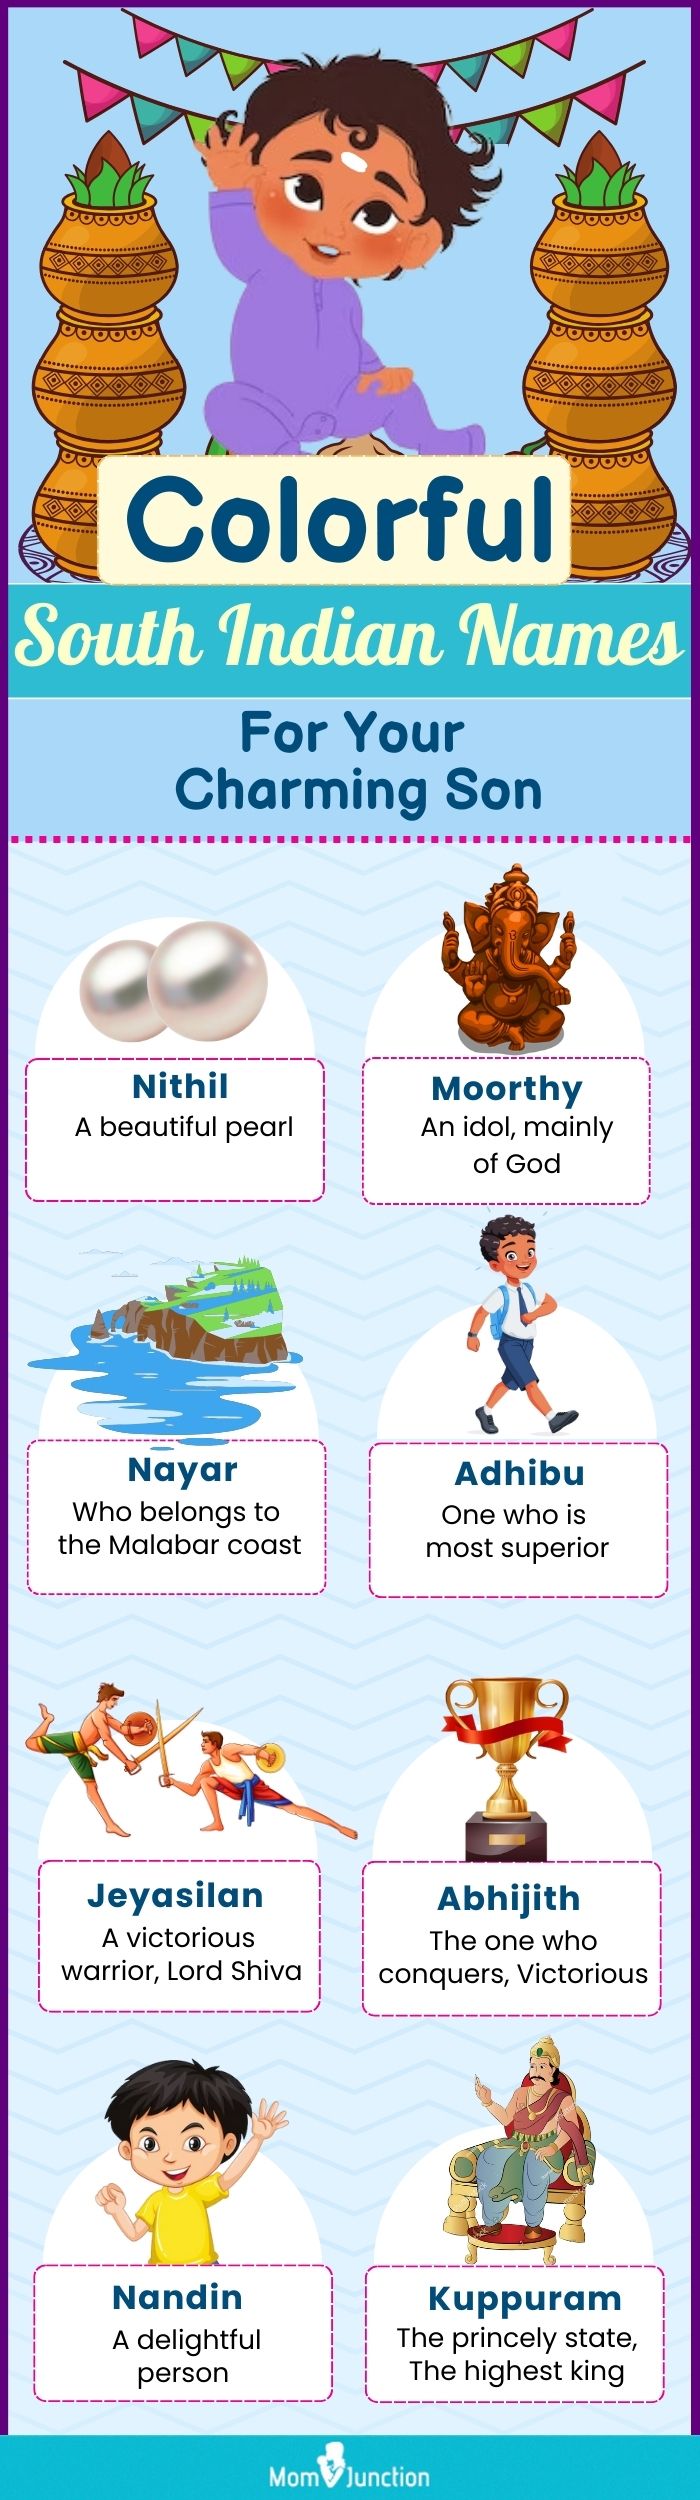 colorful south zindian names for your charming son (infographic)